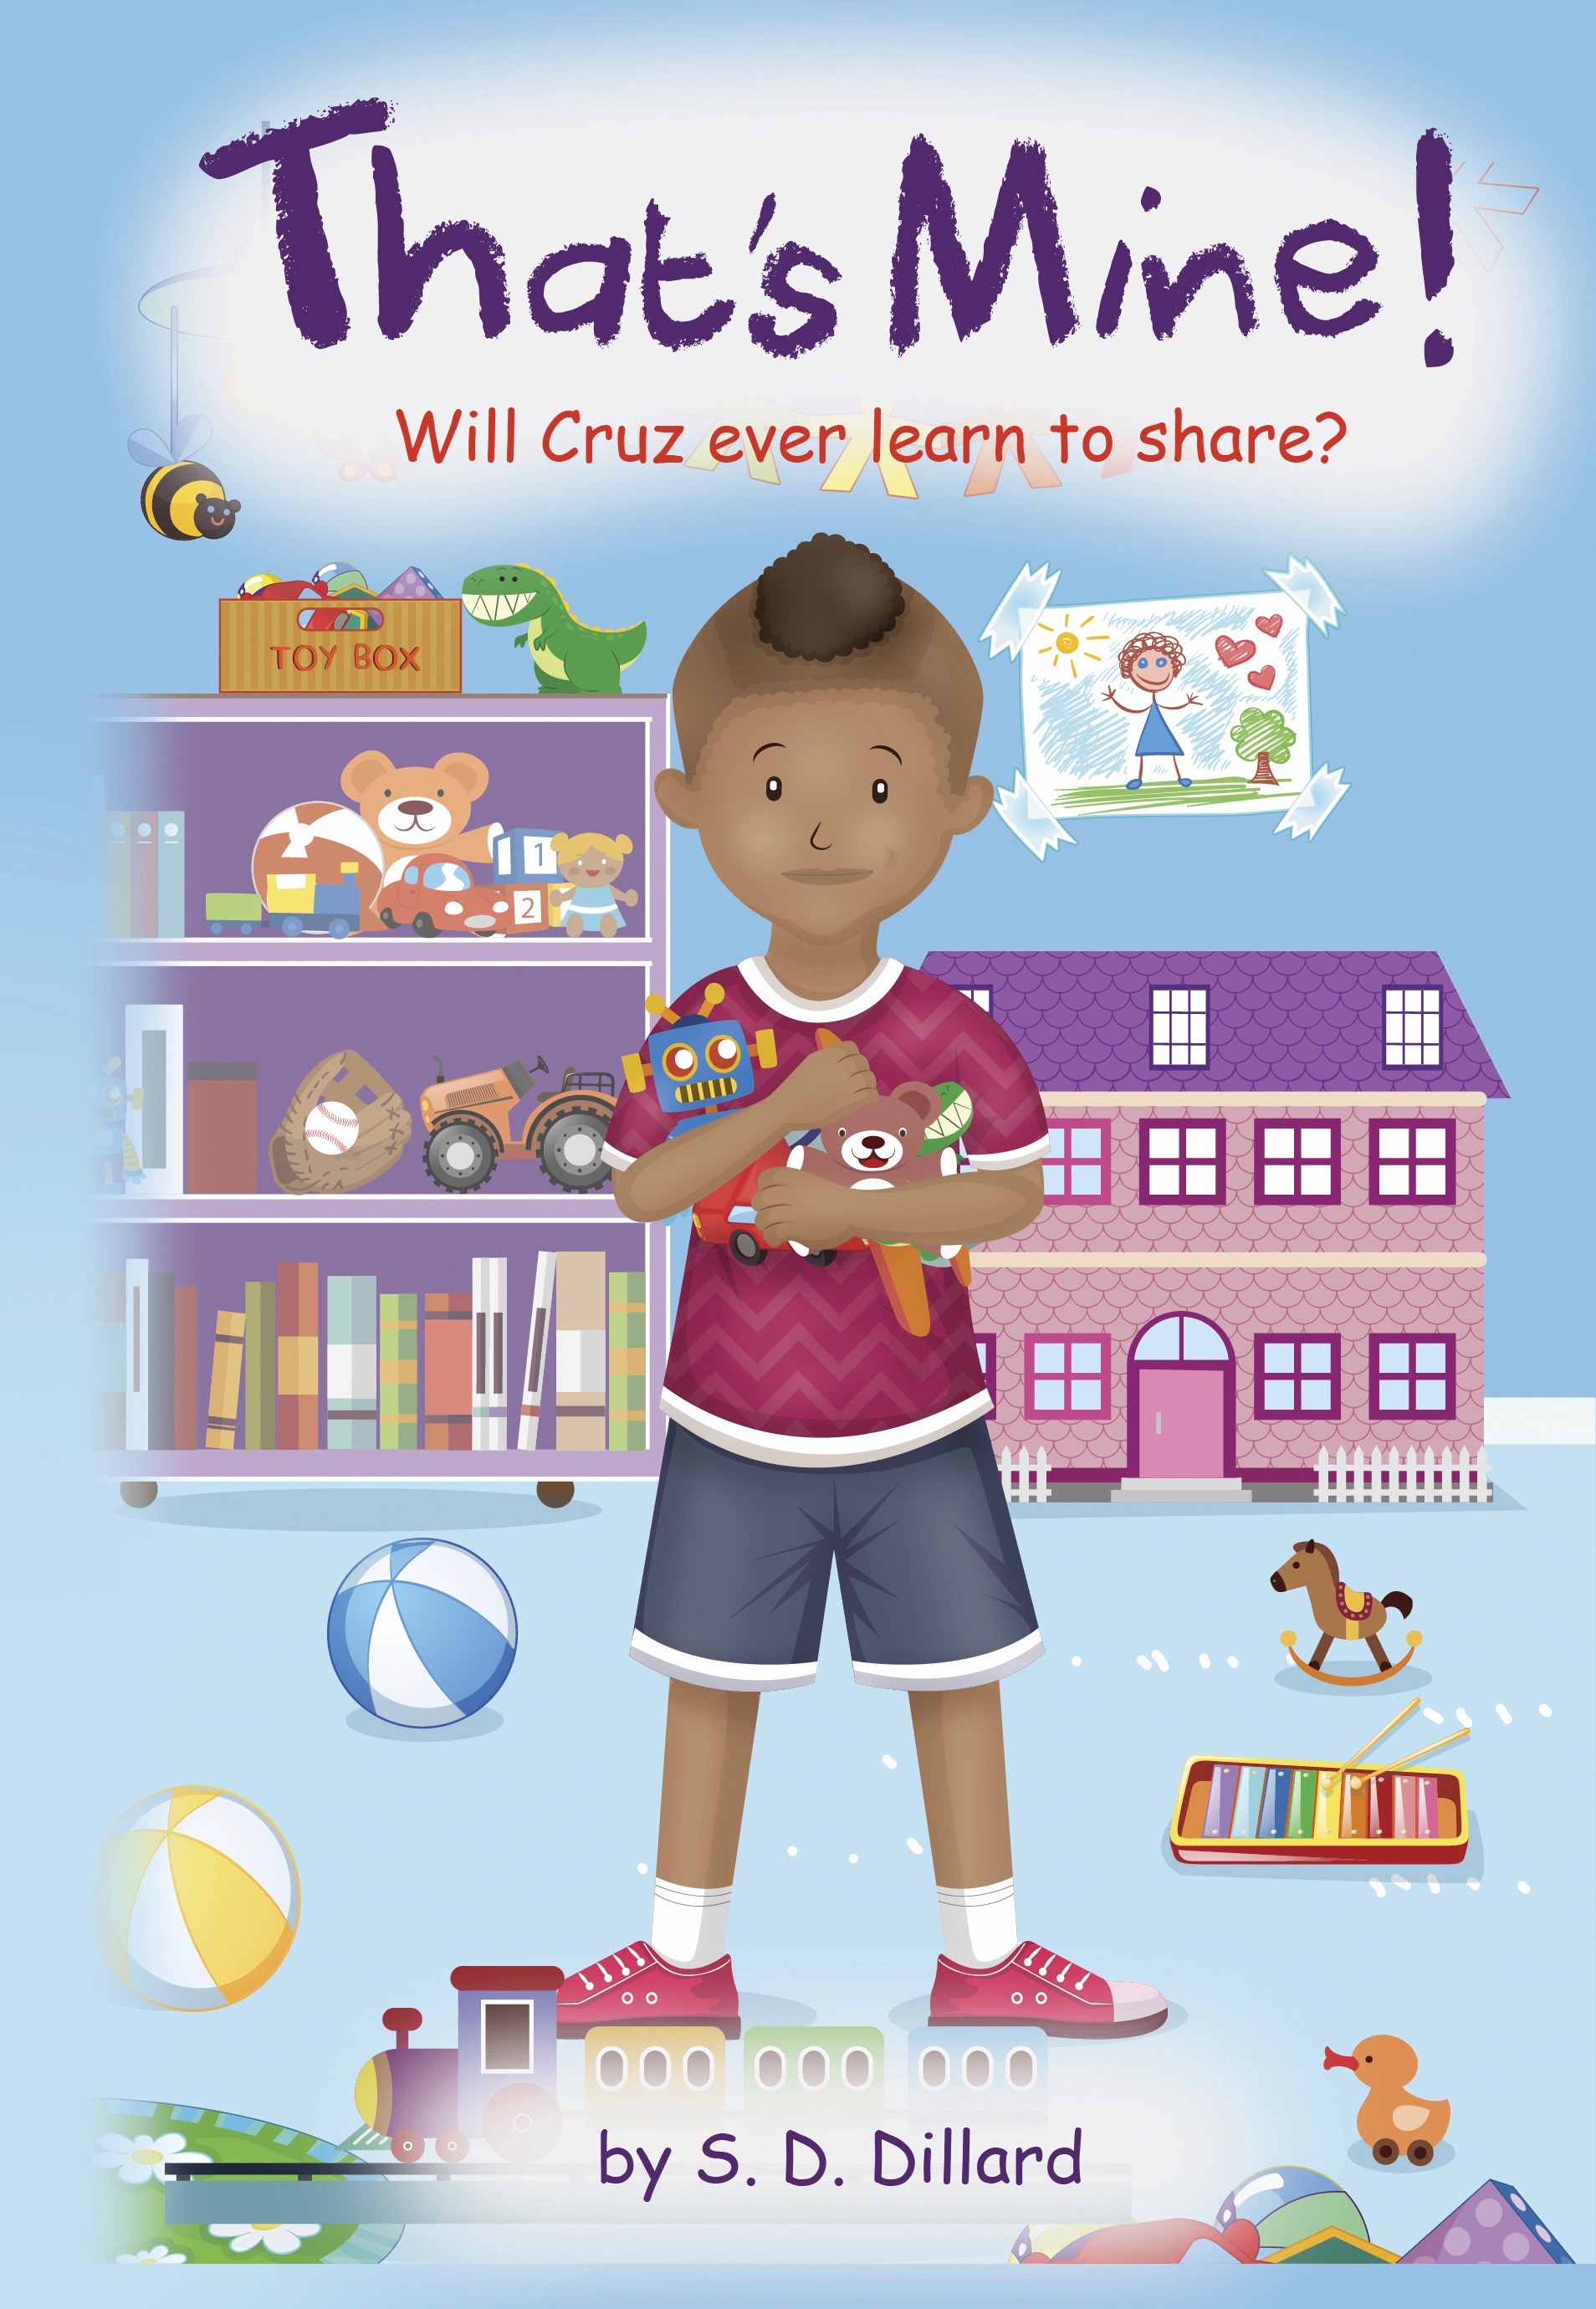 FREE: That’s Mine! Will Cruz ever learn to share by S. D. Dillard